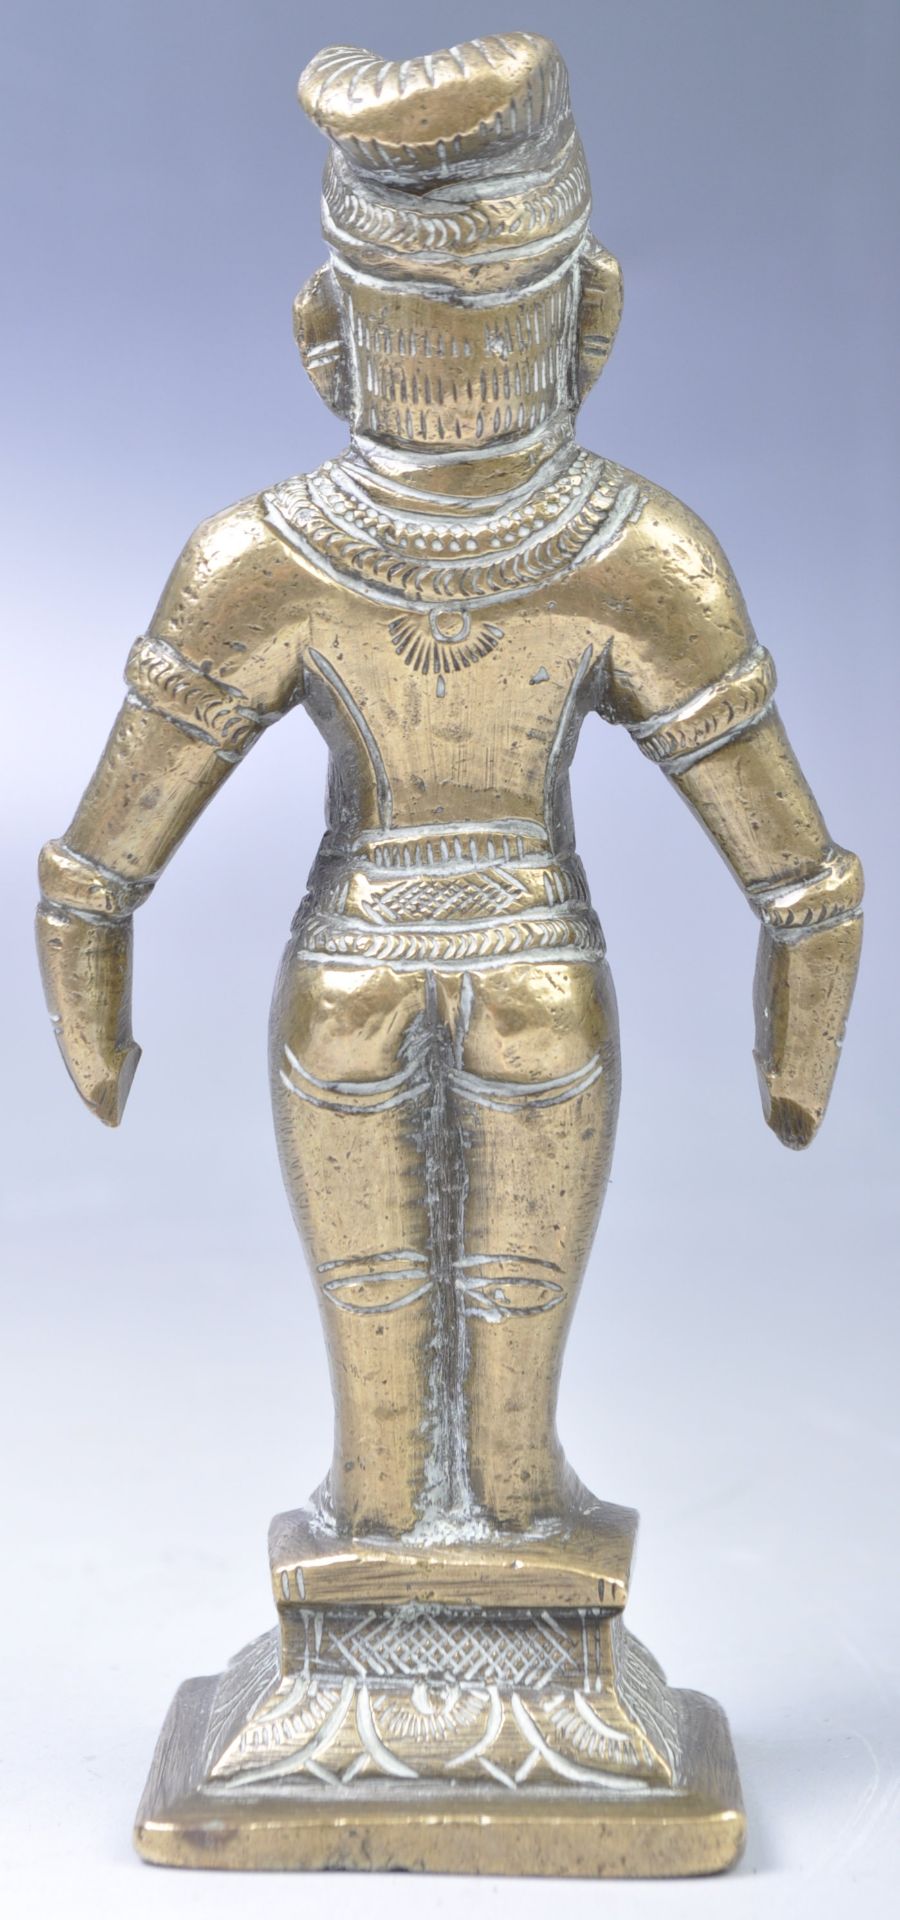 19TH CENTURY INDIAN BRONZE OF VITTHAL WITH ARMS BY SIDES - Image 3 of 4